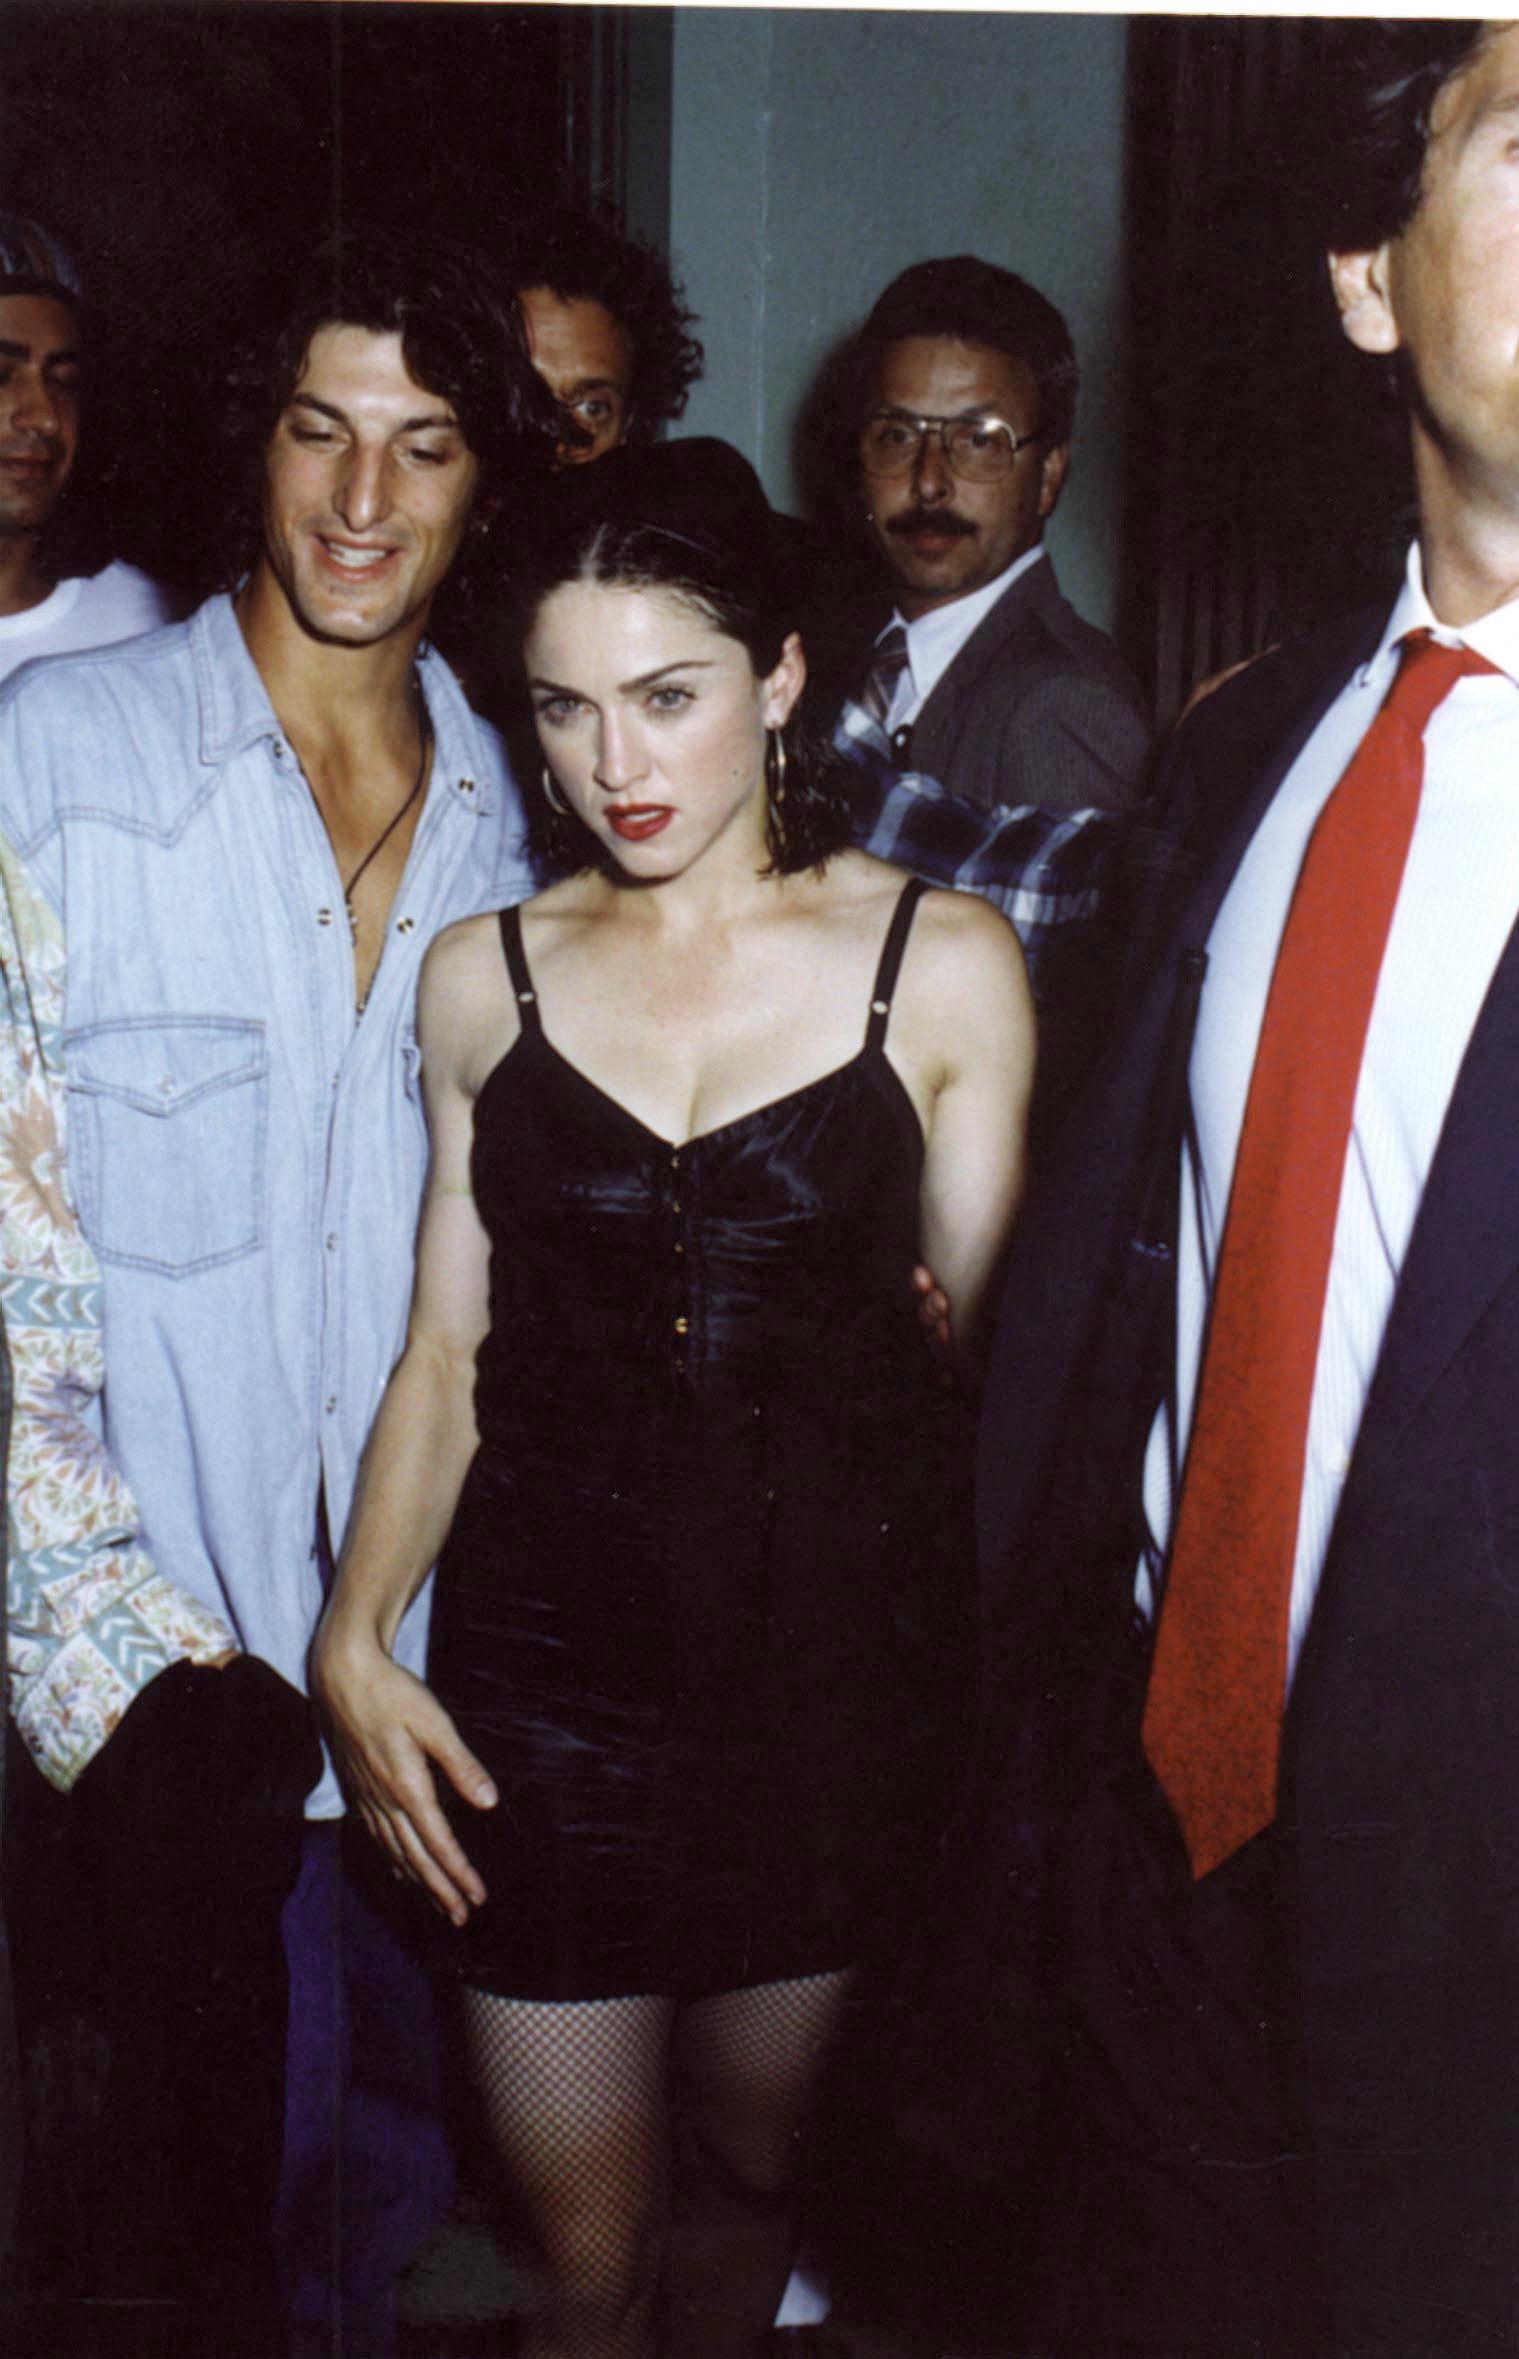 Tony Ward and Madonna pictured together in 1991